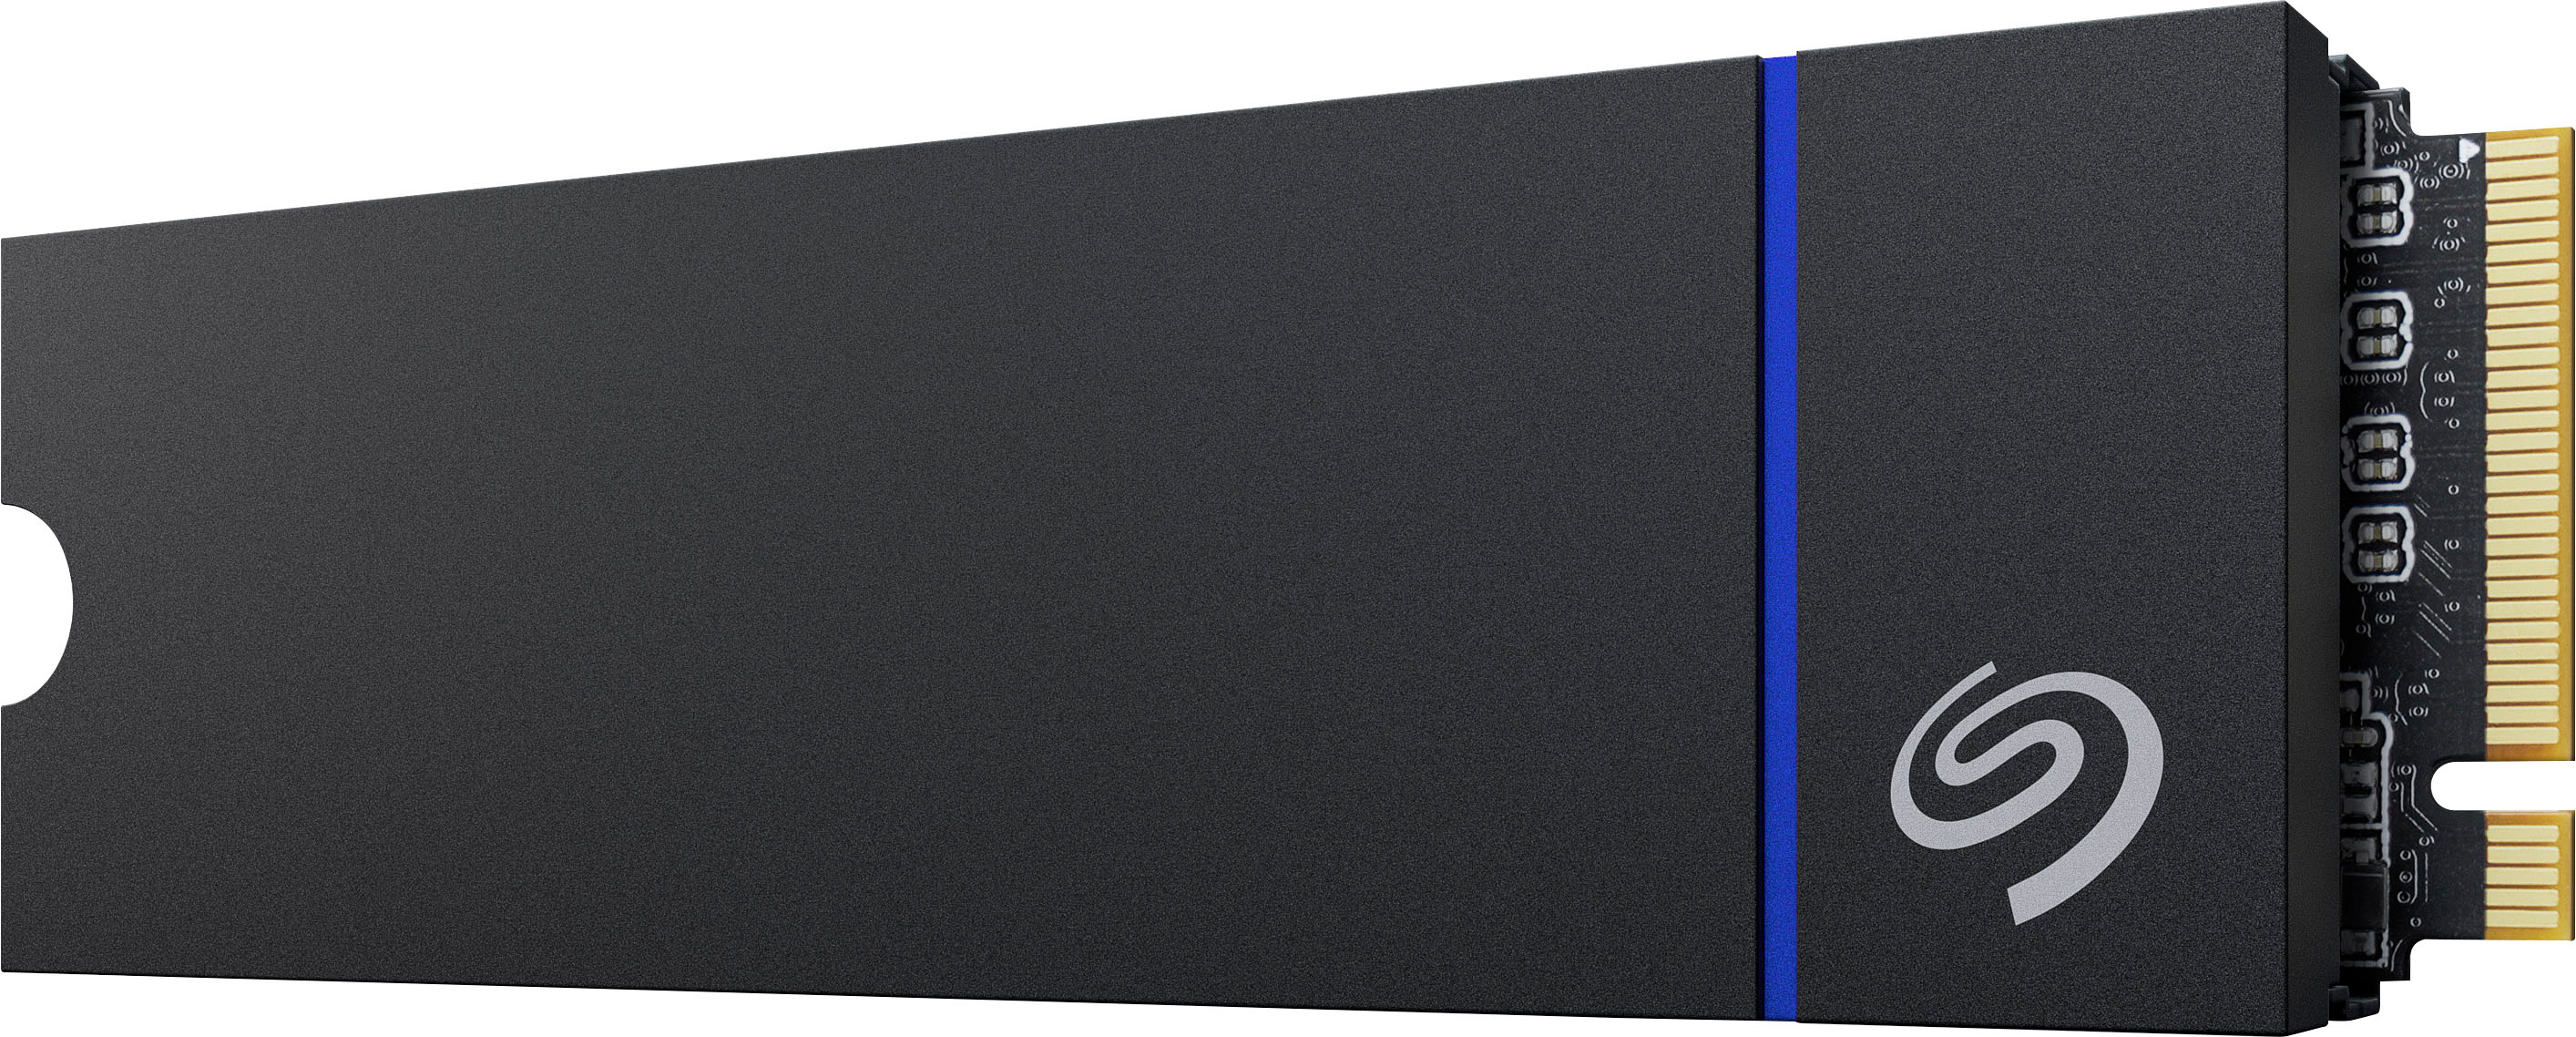 This 1TB PS5 SSD Includes a Heatsink for $90, and It's Never Been